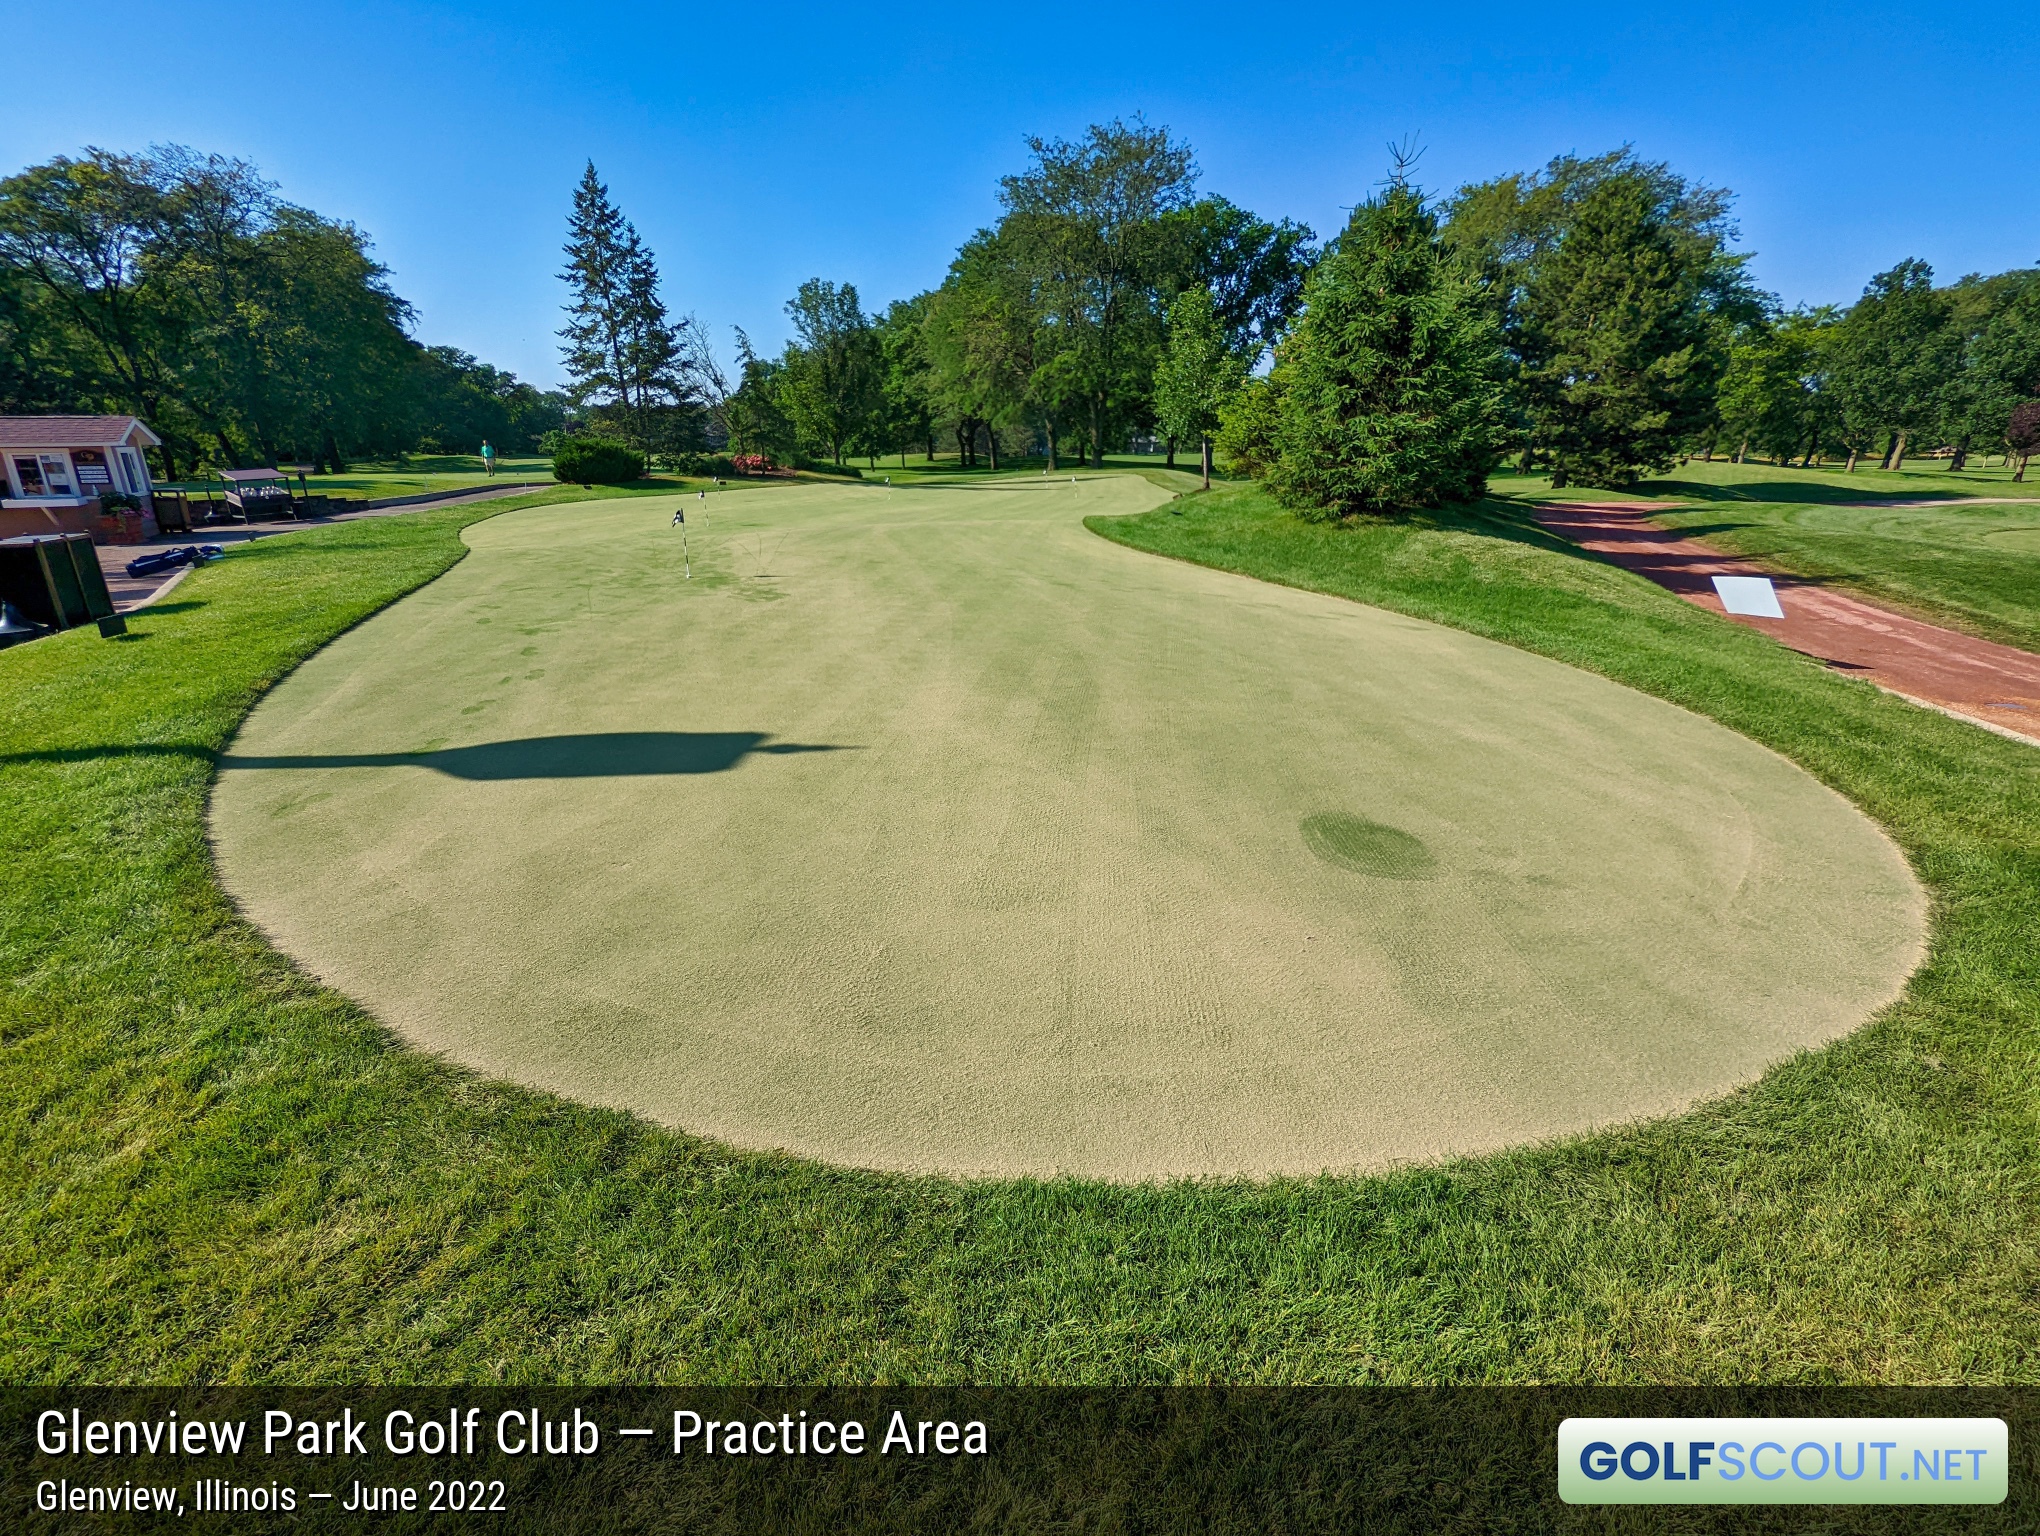 Photo of the practice area at Glenview Park Golf Club in Glenview, Illinois. 